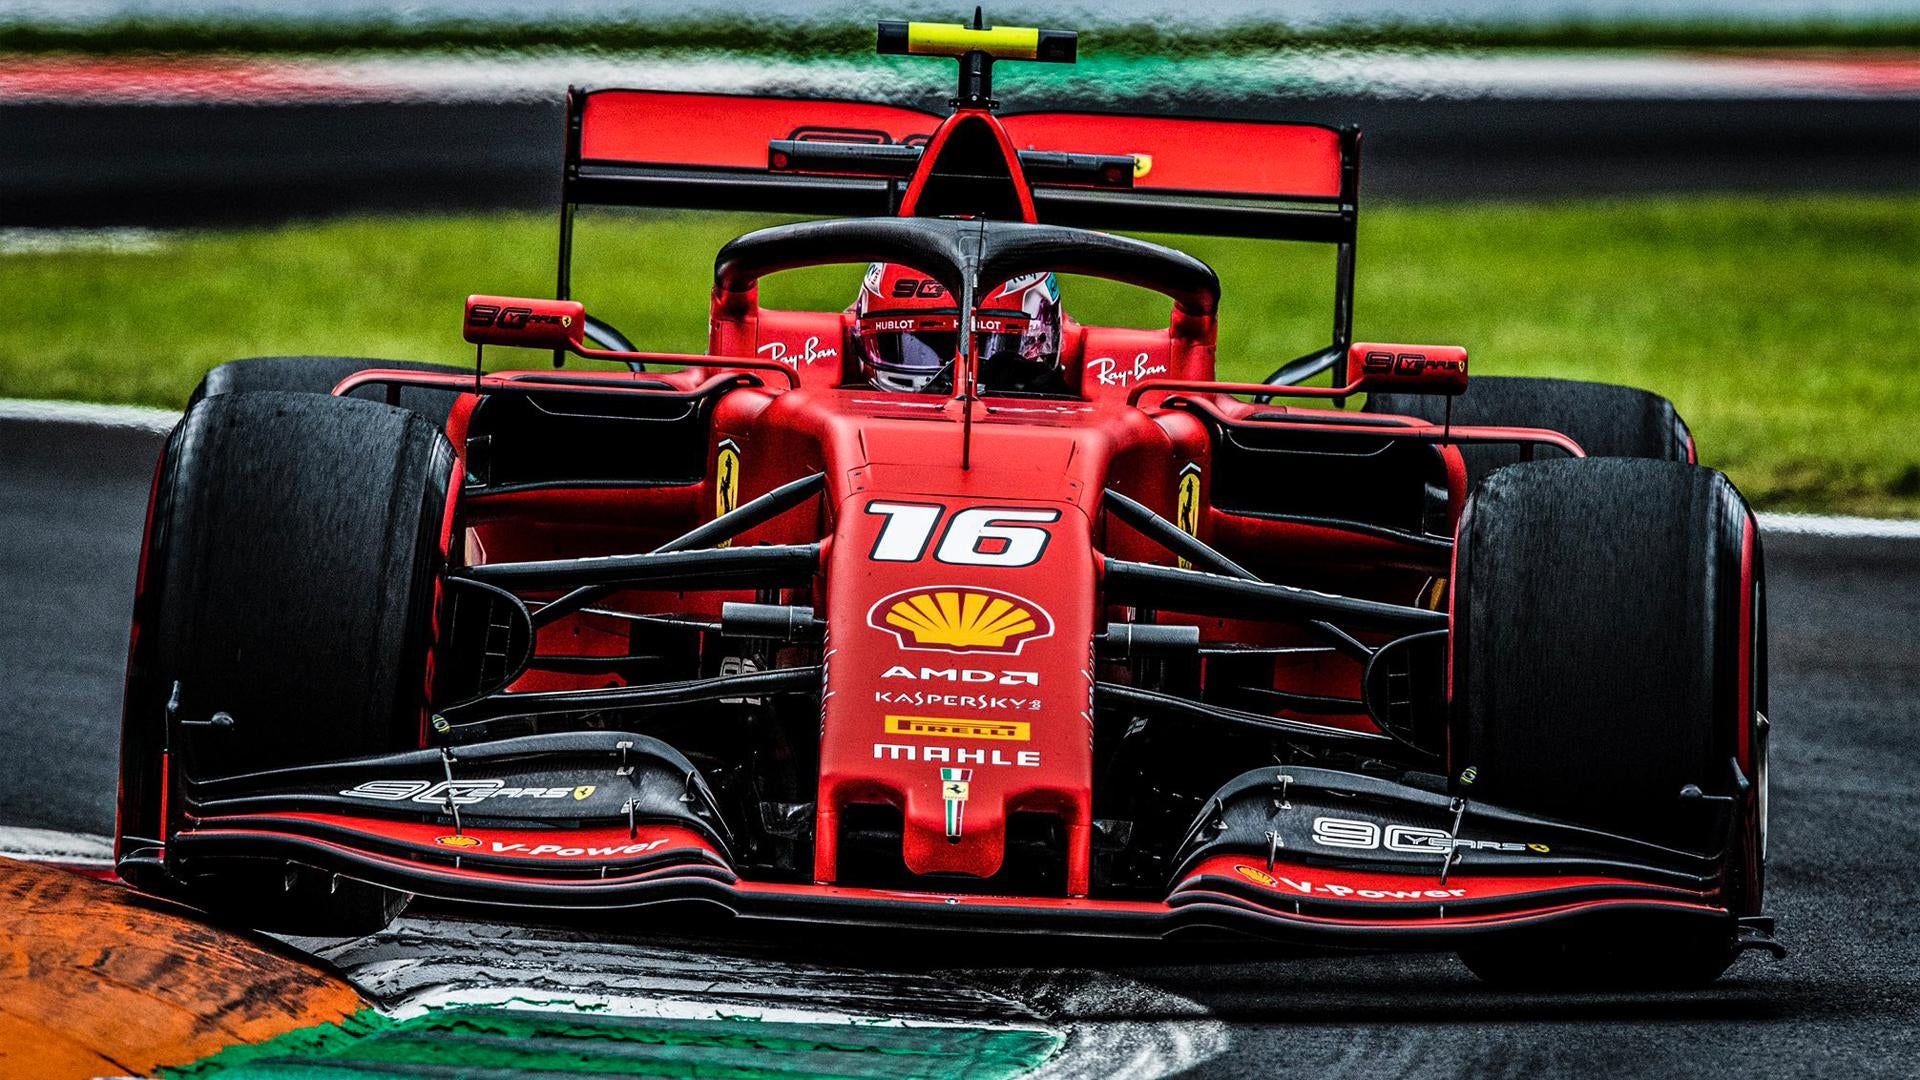 Charles Leclerc, Monza 2019. I think this is a great shot, it's my desktop wallpaper from a while